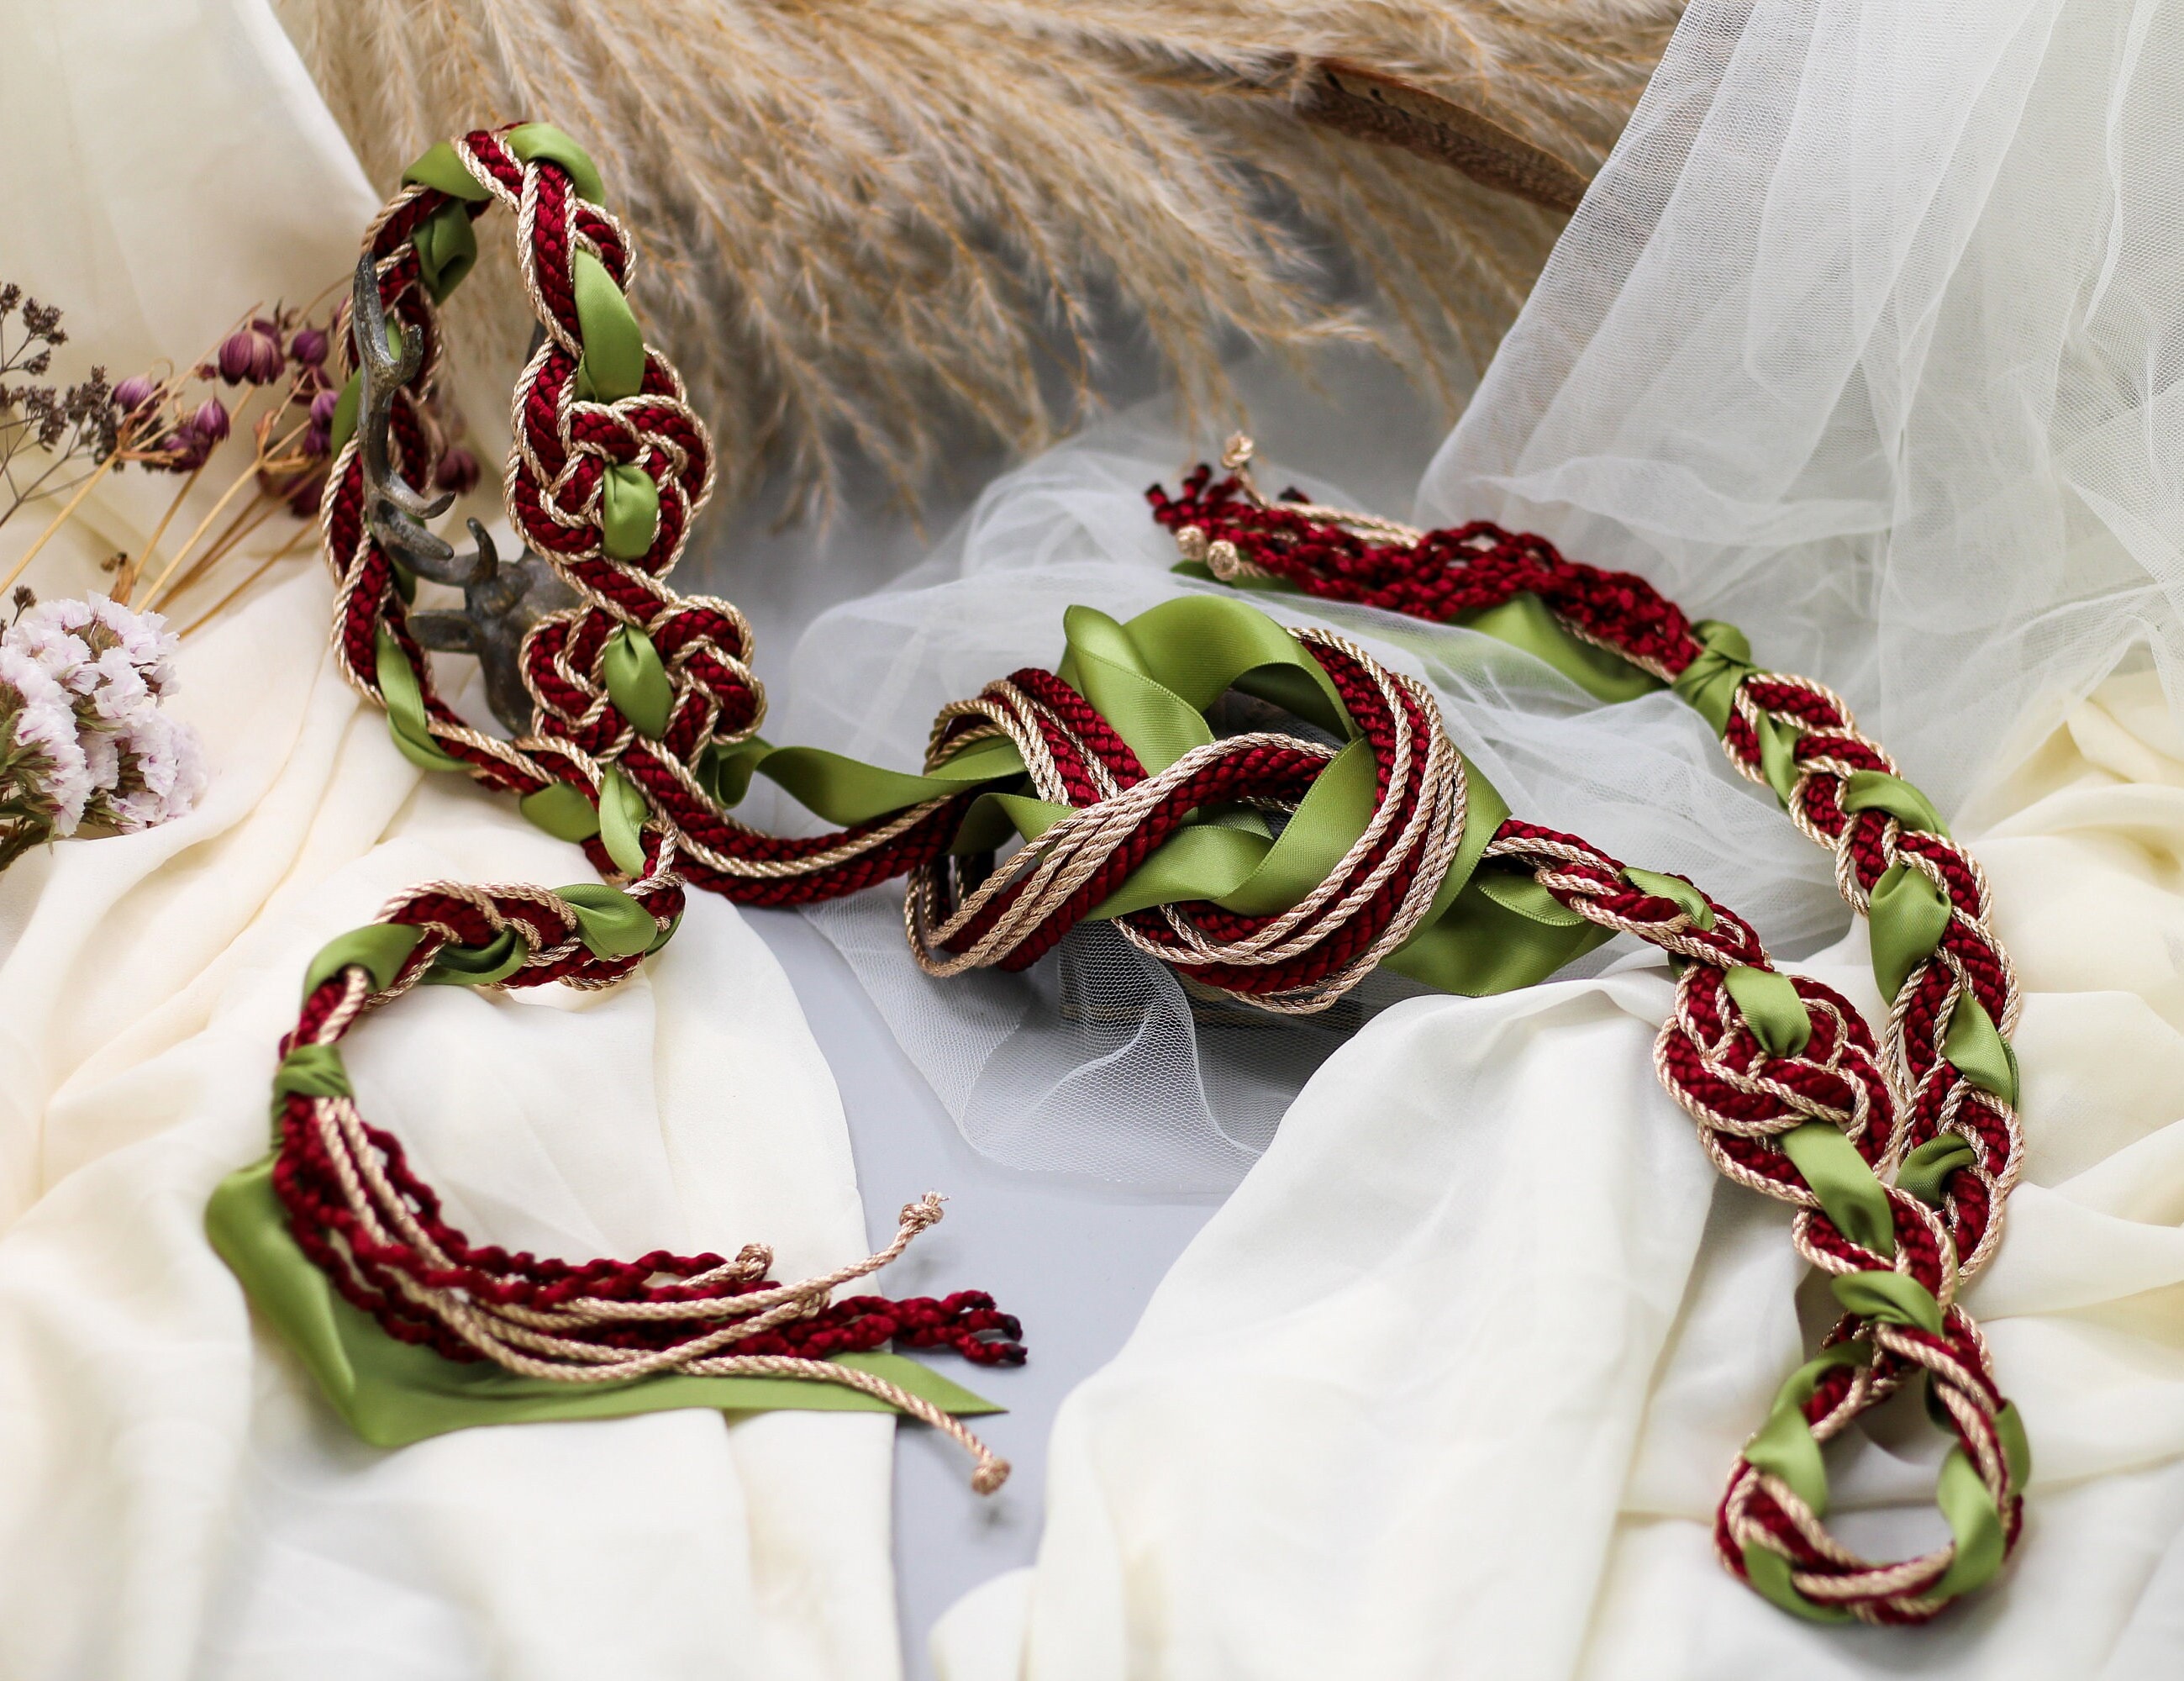 Ceotha - handfasting cords and accessories